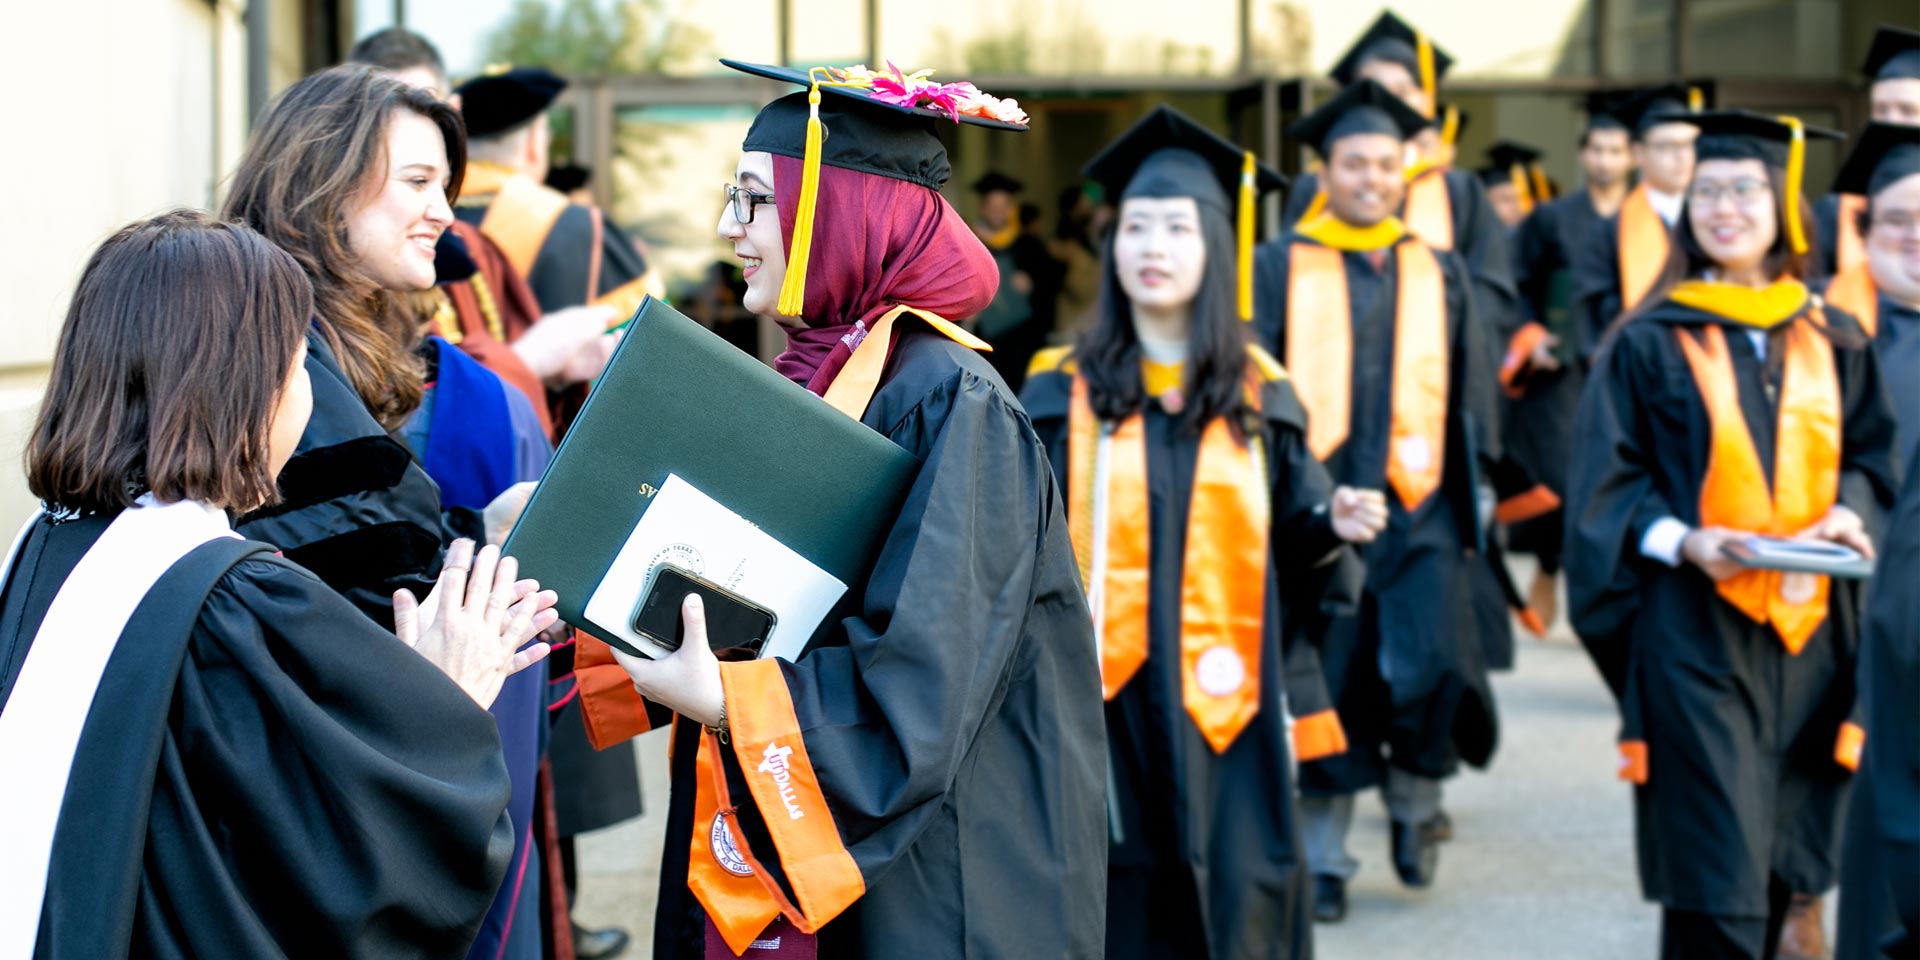 UT Dallas information systems graduates, including master's in business analytics majors